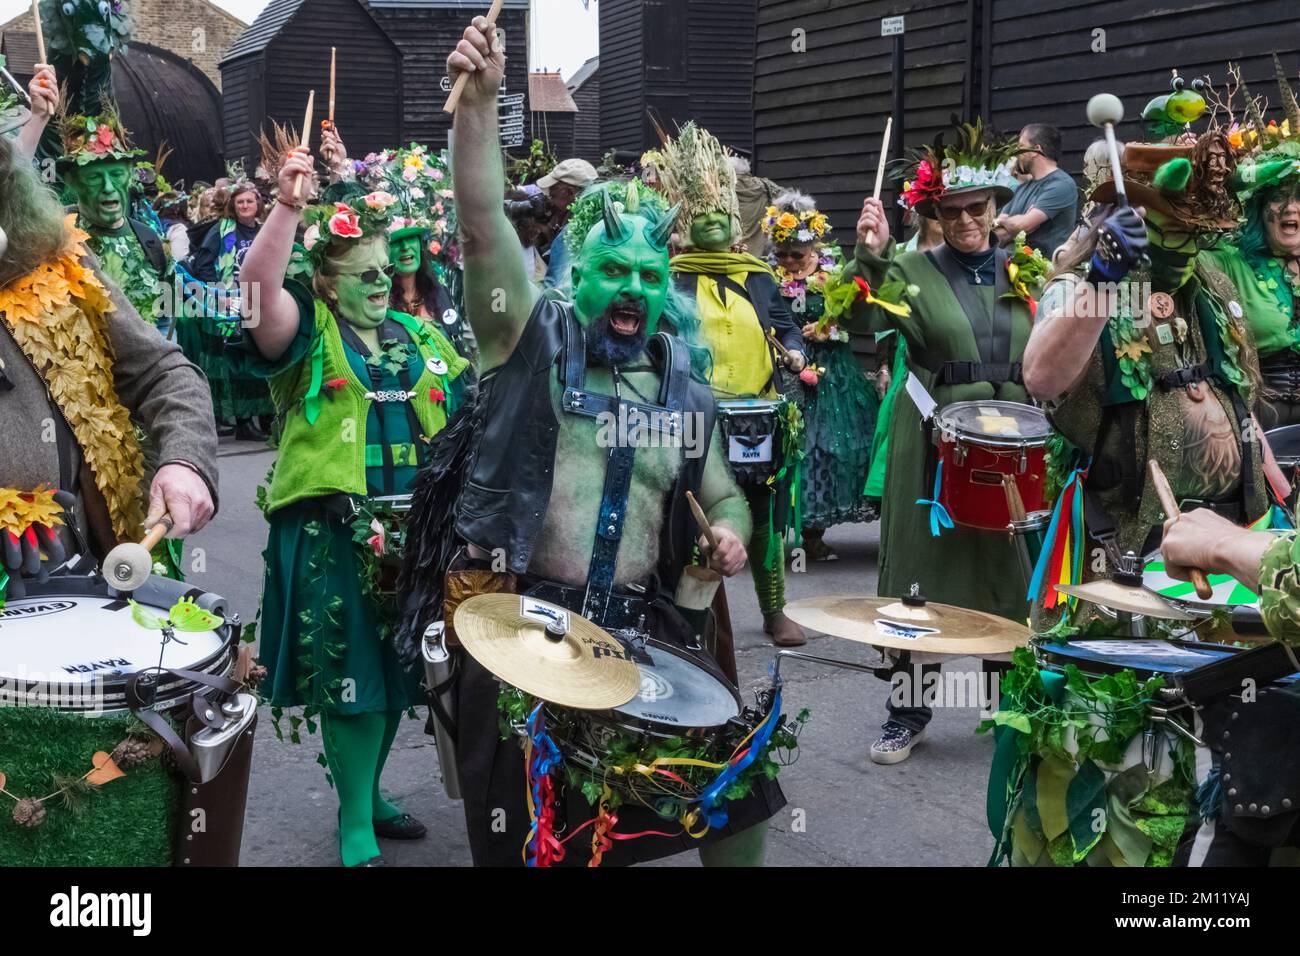 England, East Sussex, Hastings, The Annual Jack in the Green Festival, Musical Band at the Jack in the Green Parade Stockfoto